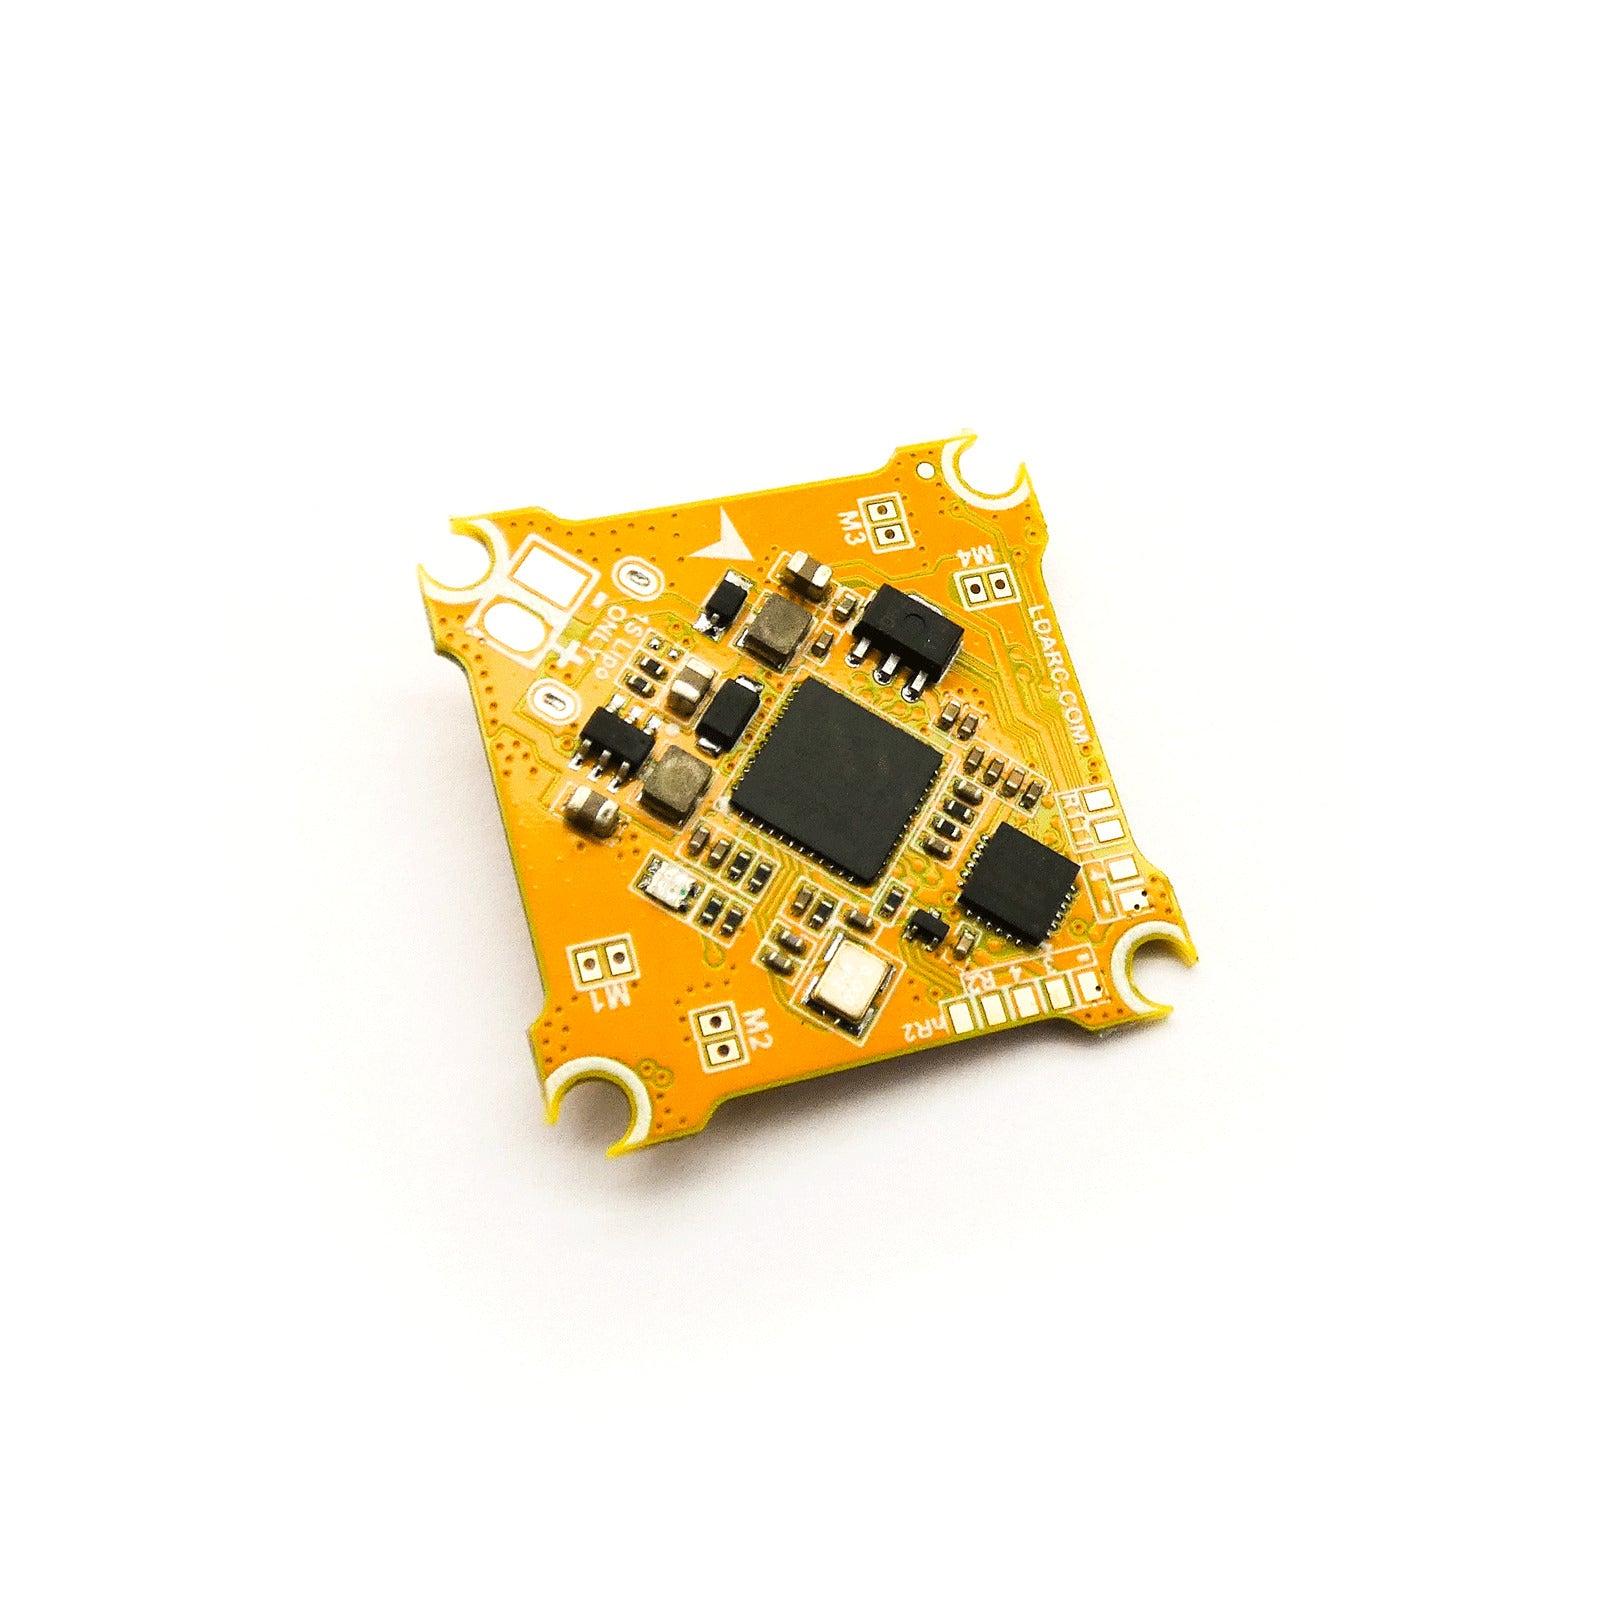 Product Upgrade Your Drone With LDARC F411-B2 Controller image